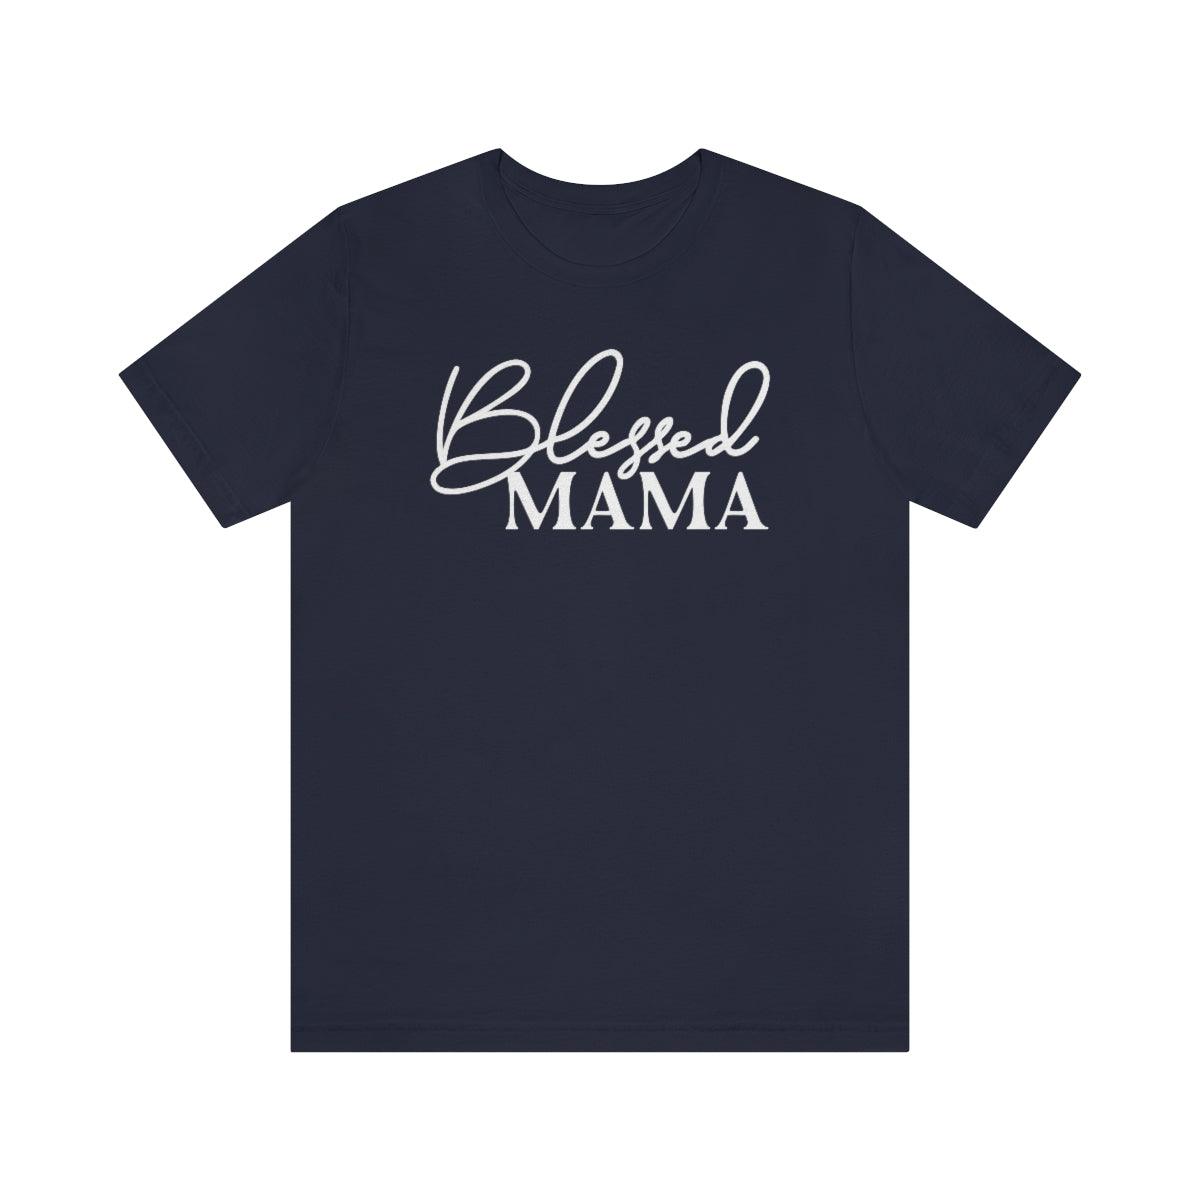 Blessed Mama Short Sleeve Tee - Crystal Rose Design Co.